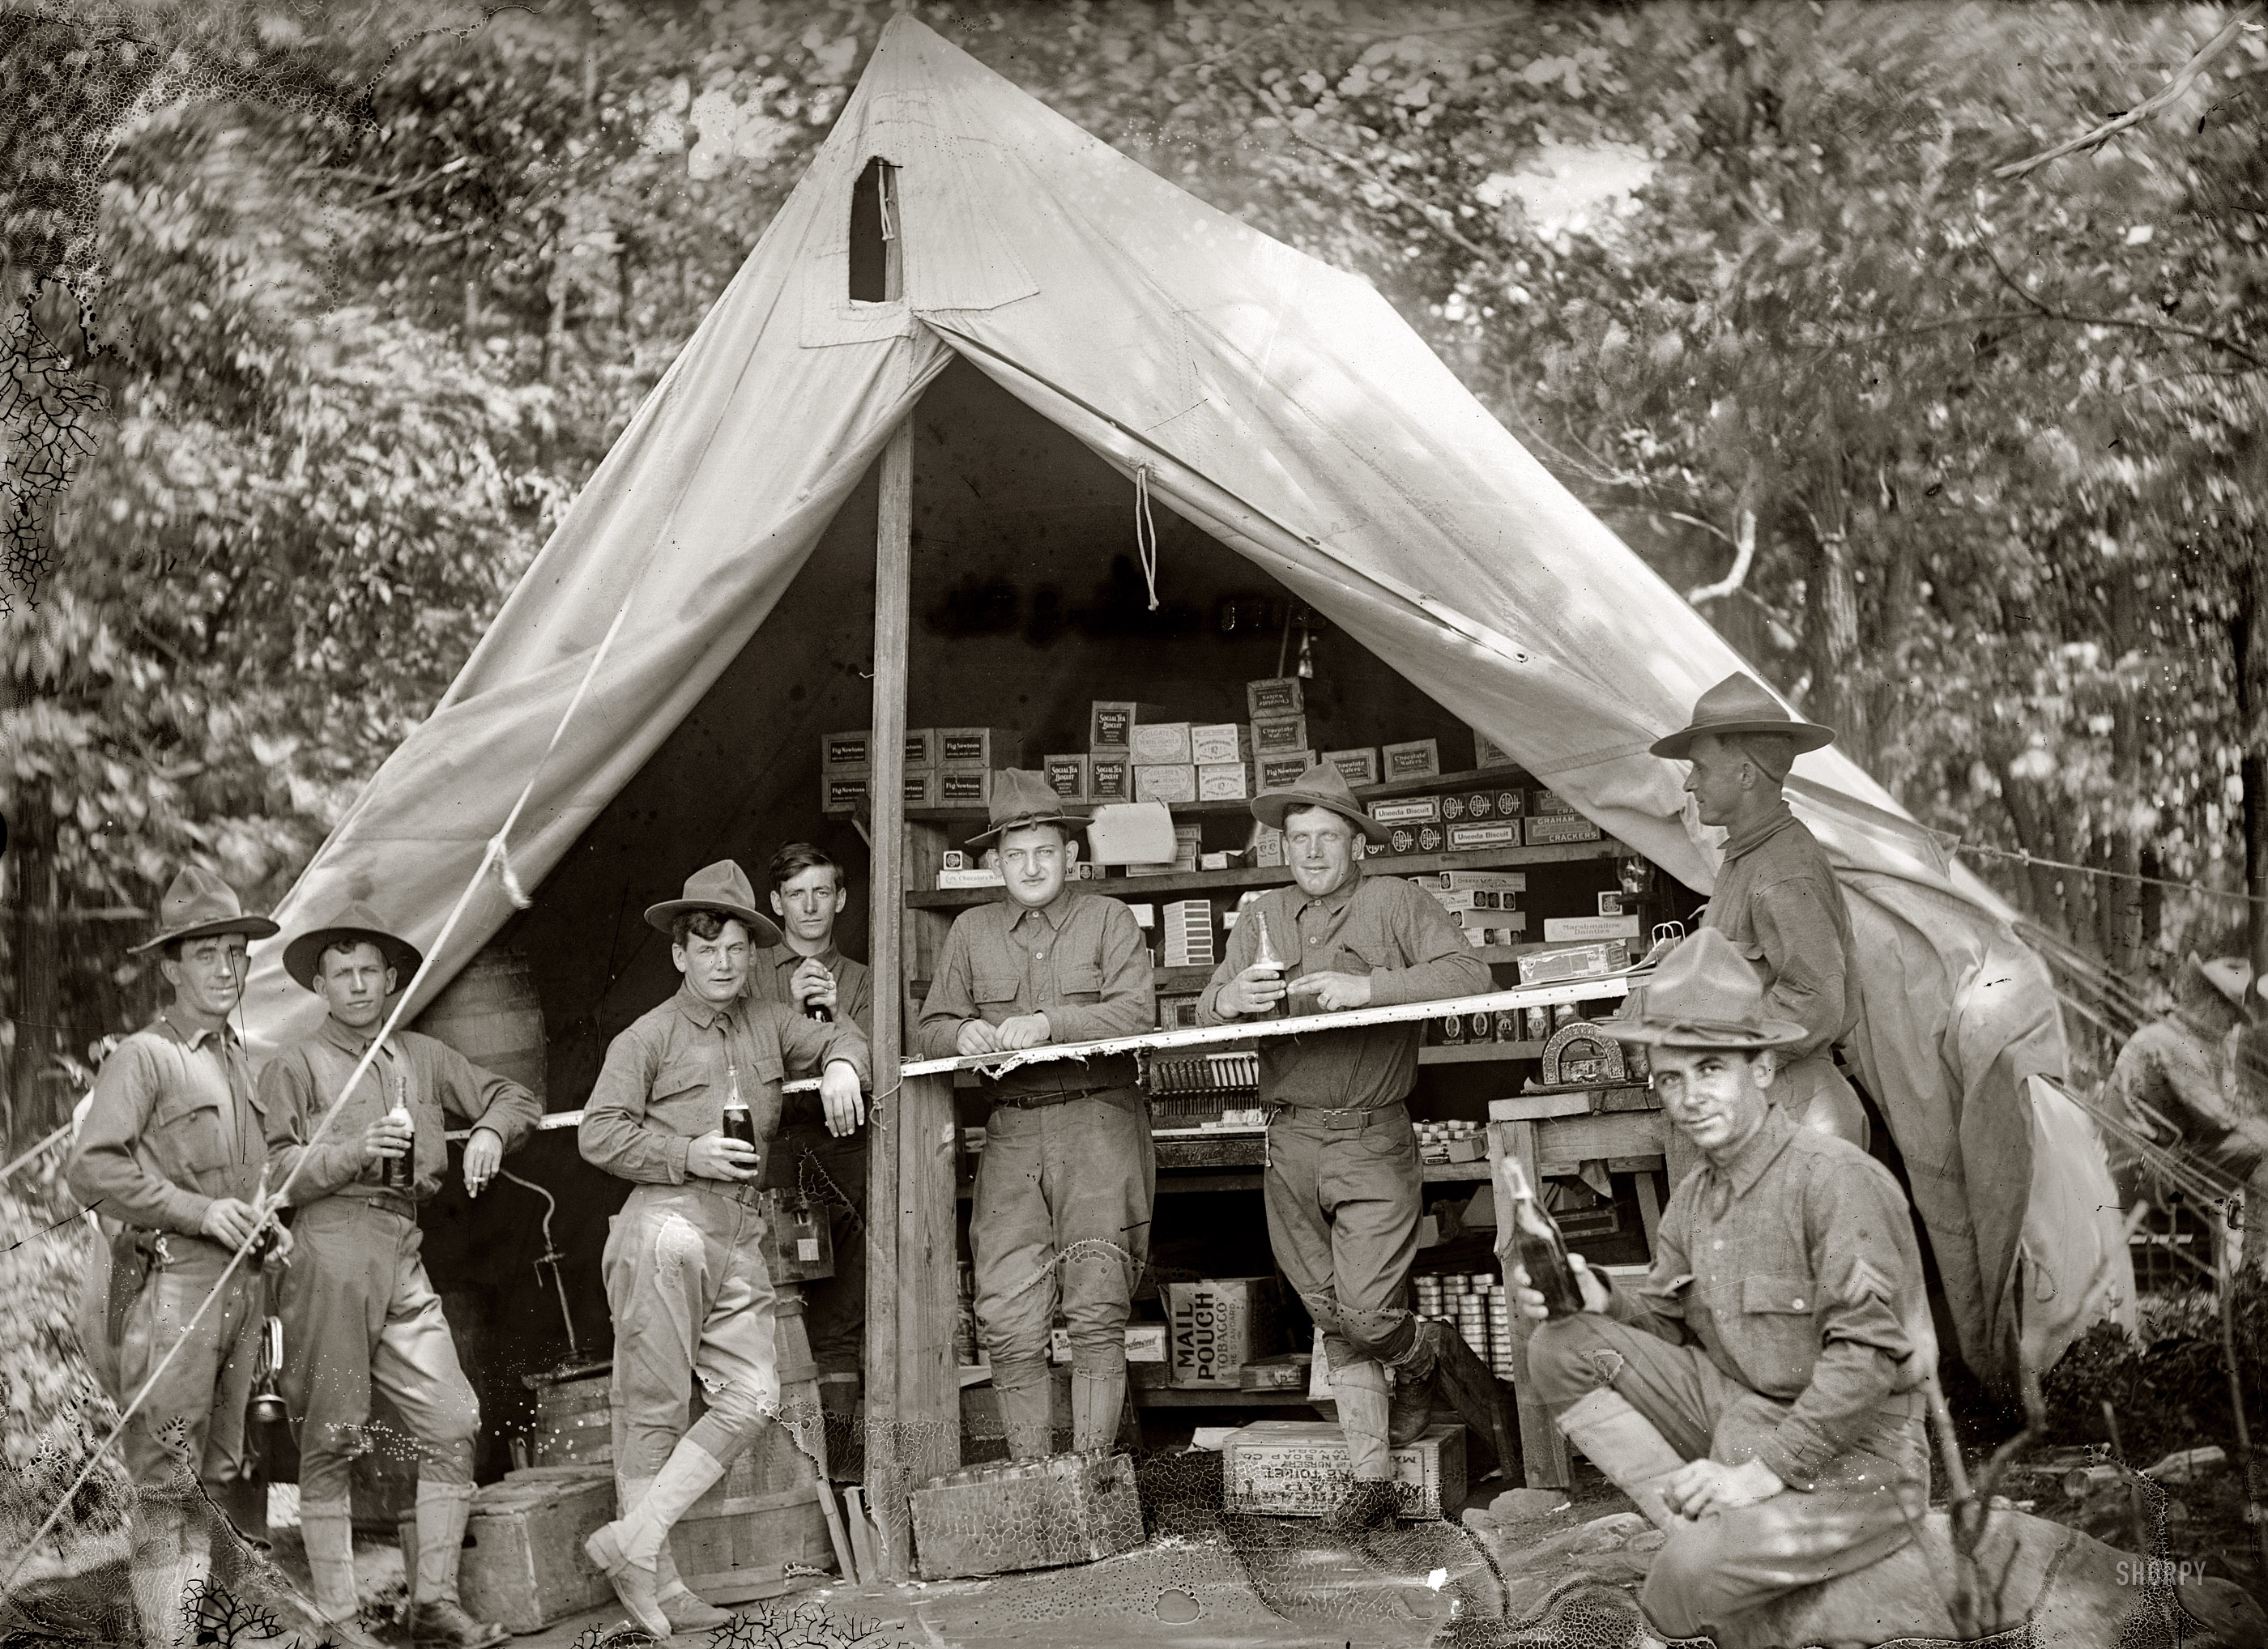 Circa 1914. "U.S. Army or National Guard." Among the comestibles behind the cash register: Fig Newtons, Social Tea Biscuits and Marshmallow Dainties. National Photo Company Collection glass negative. View full size.